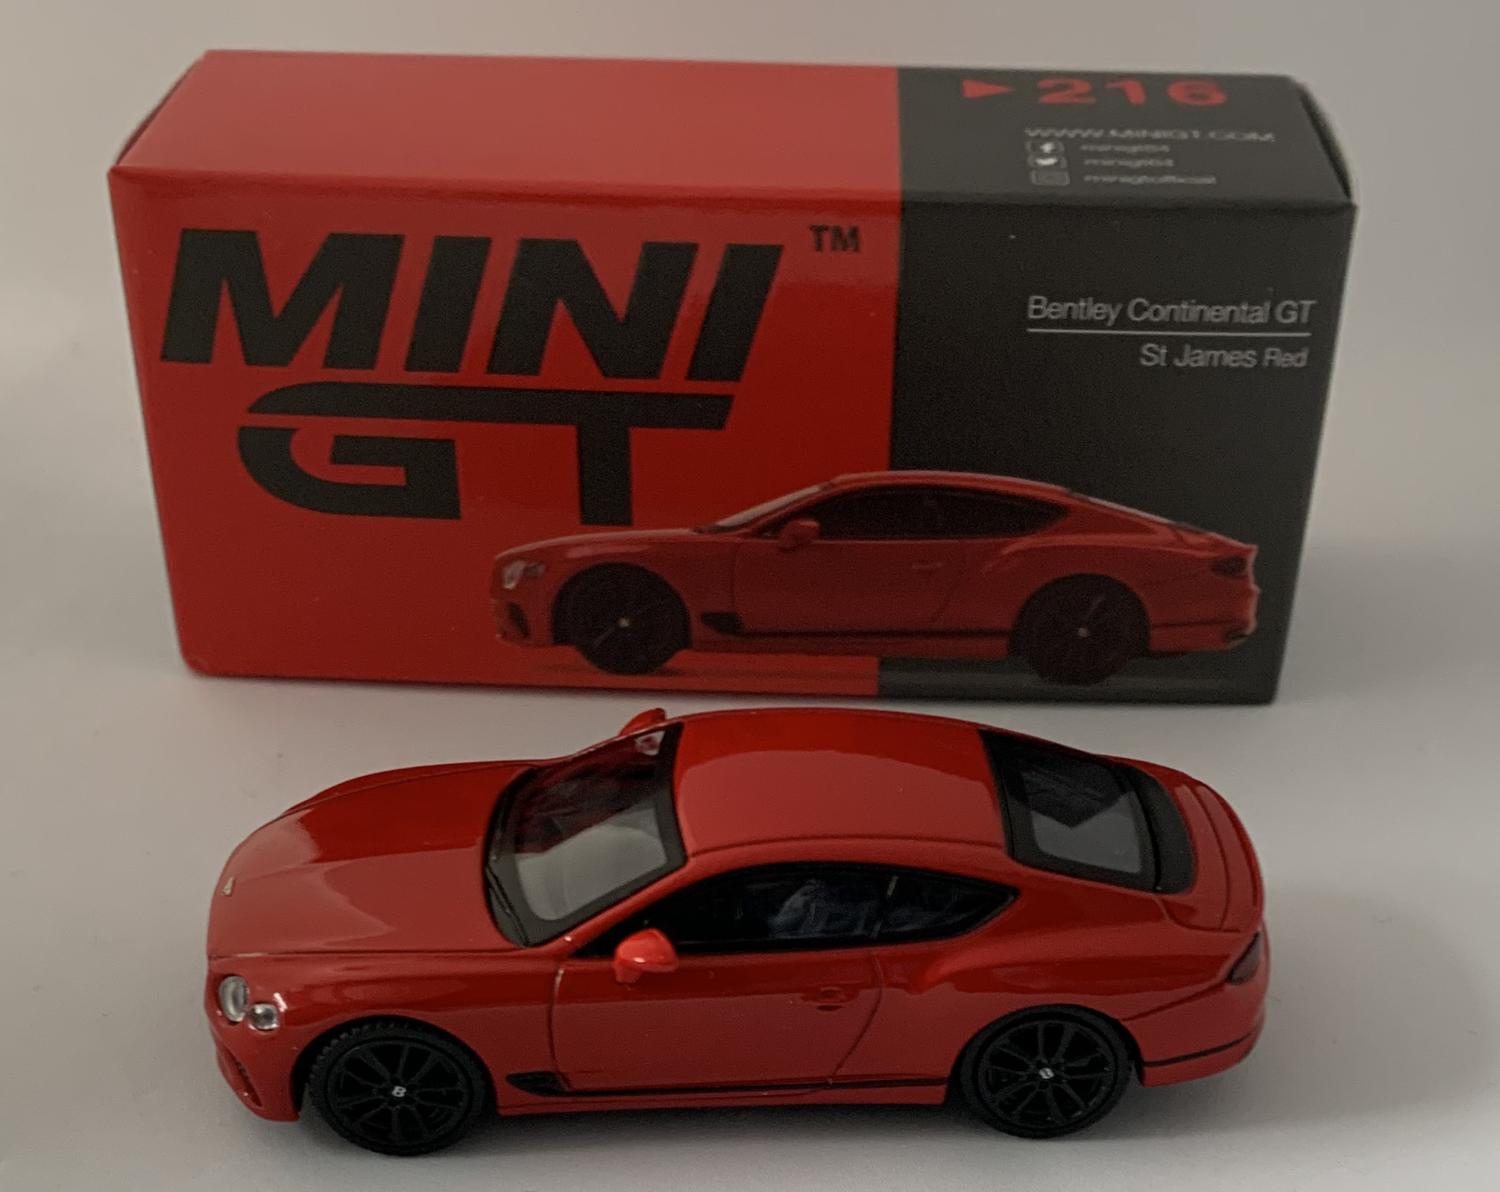 A good reproduction of the Bentley Continental GT with detail throughout, all authentically recreated. The model is presented in a box, the car is approx. 7.5 cm long and the box is 10 cm long